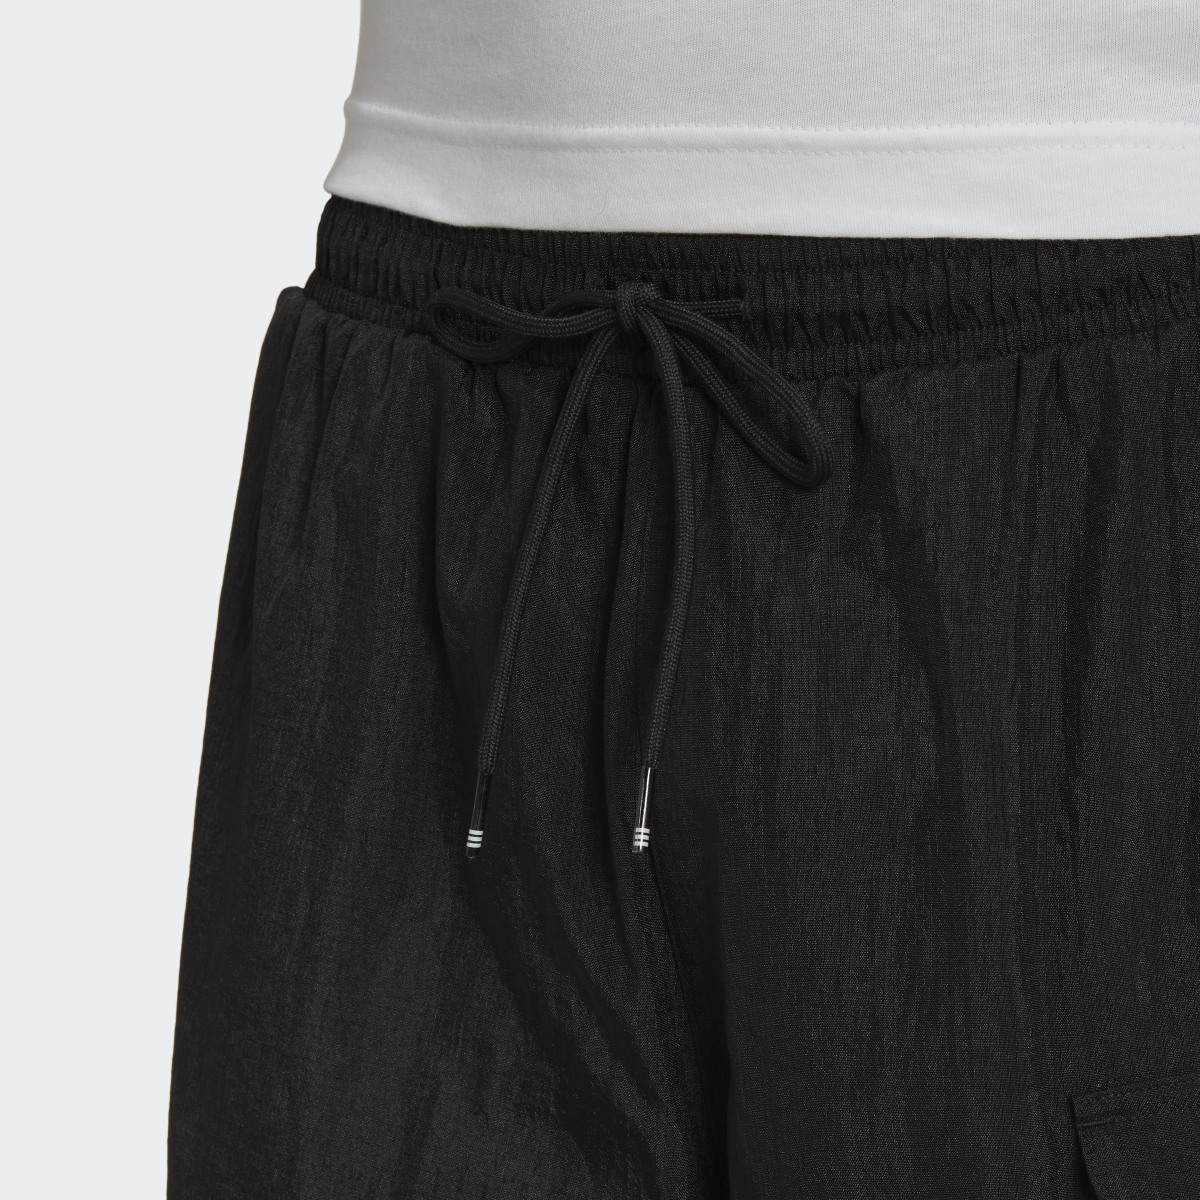 Adidas Reveal Material Mix Shorts. 6